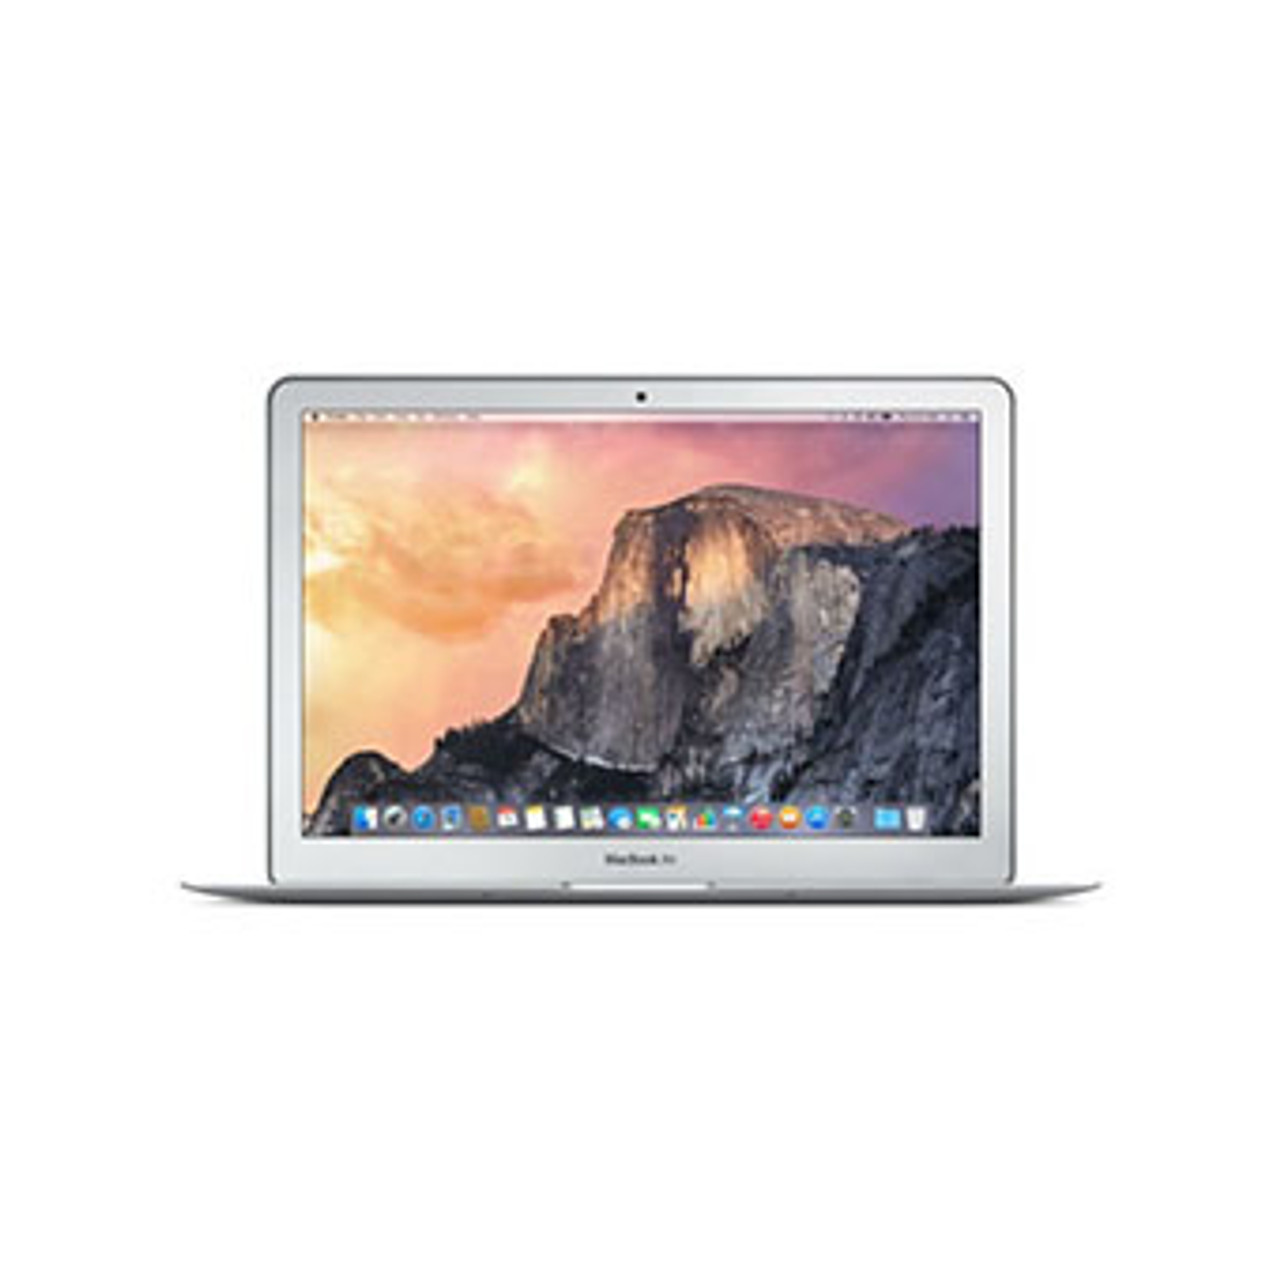 Used Apple MacBook Air 13 inch 2.2GHz Core i7 (Early 2015 